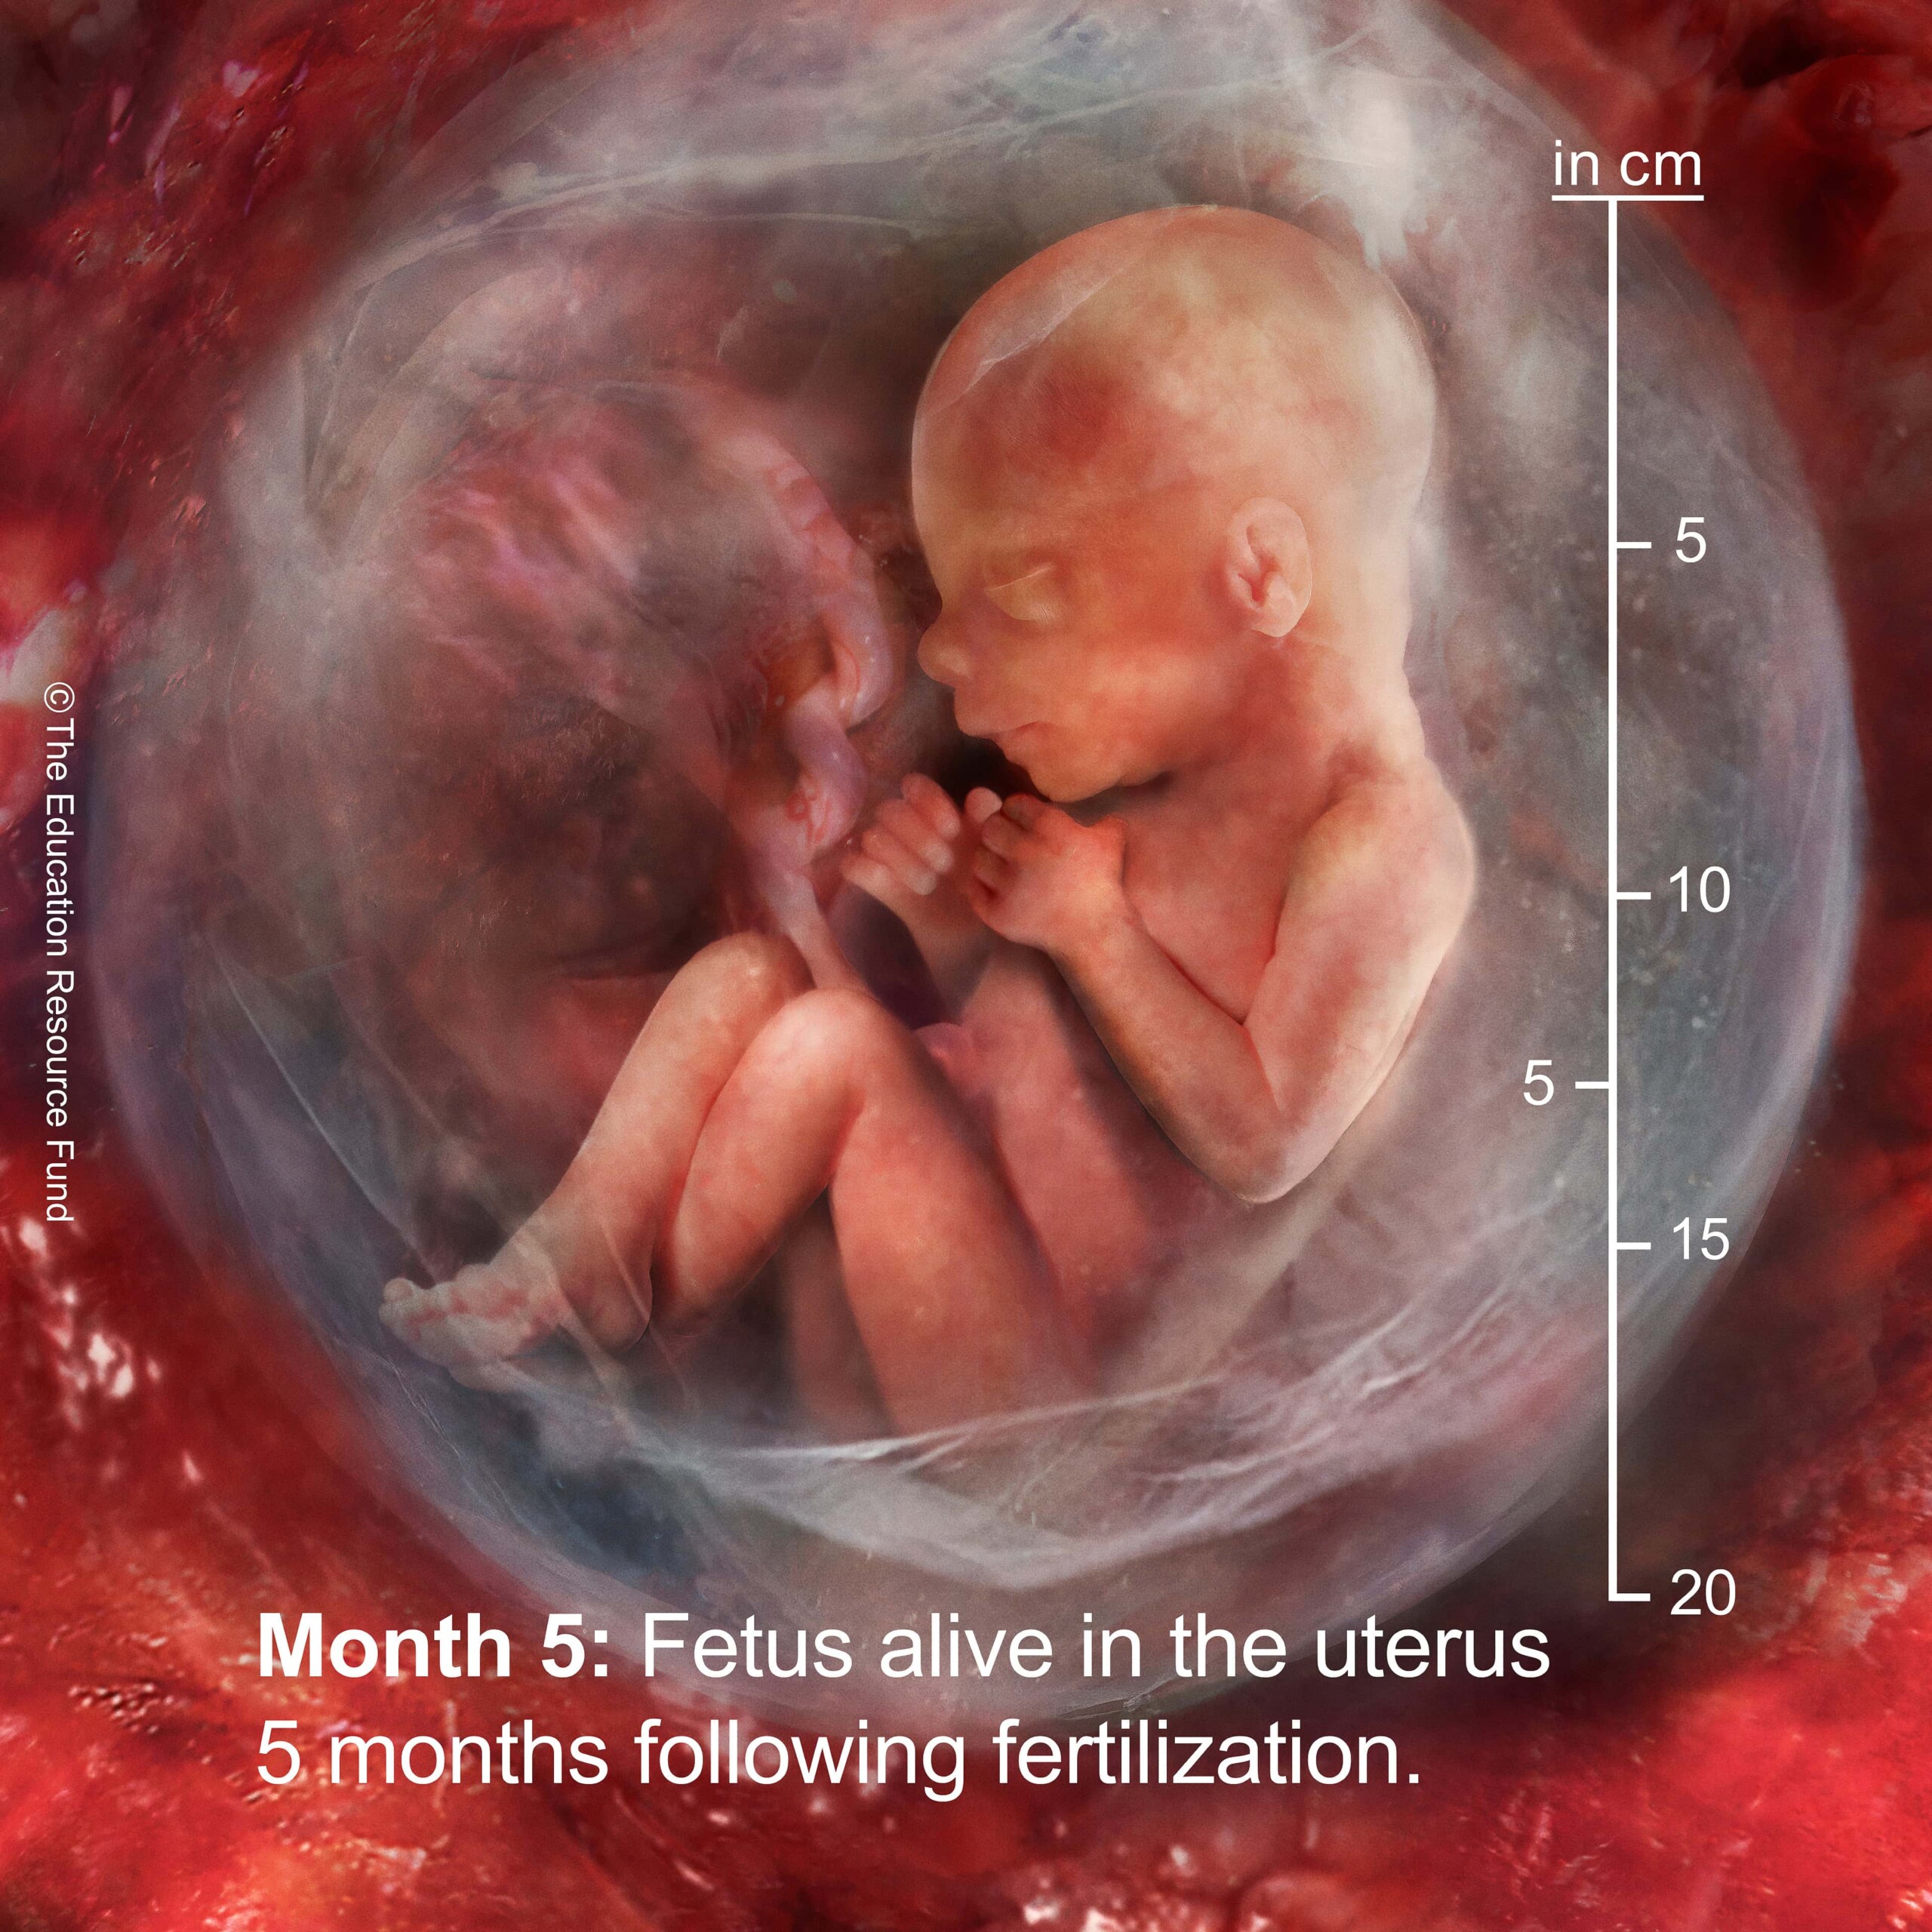 Month 5: Embryo alive in the uterus 5 months following fertilization